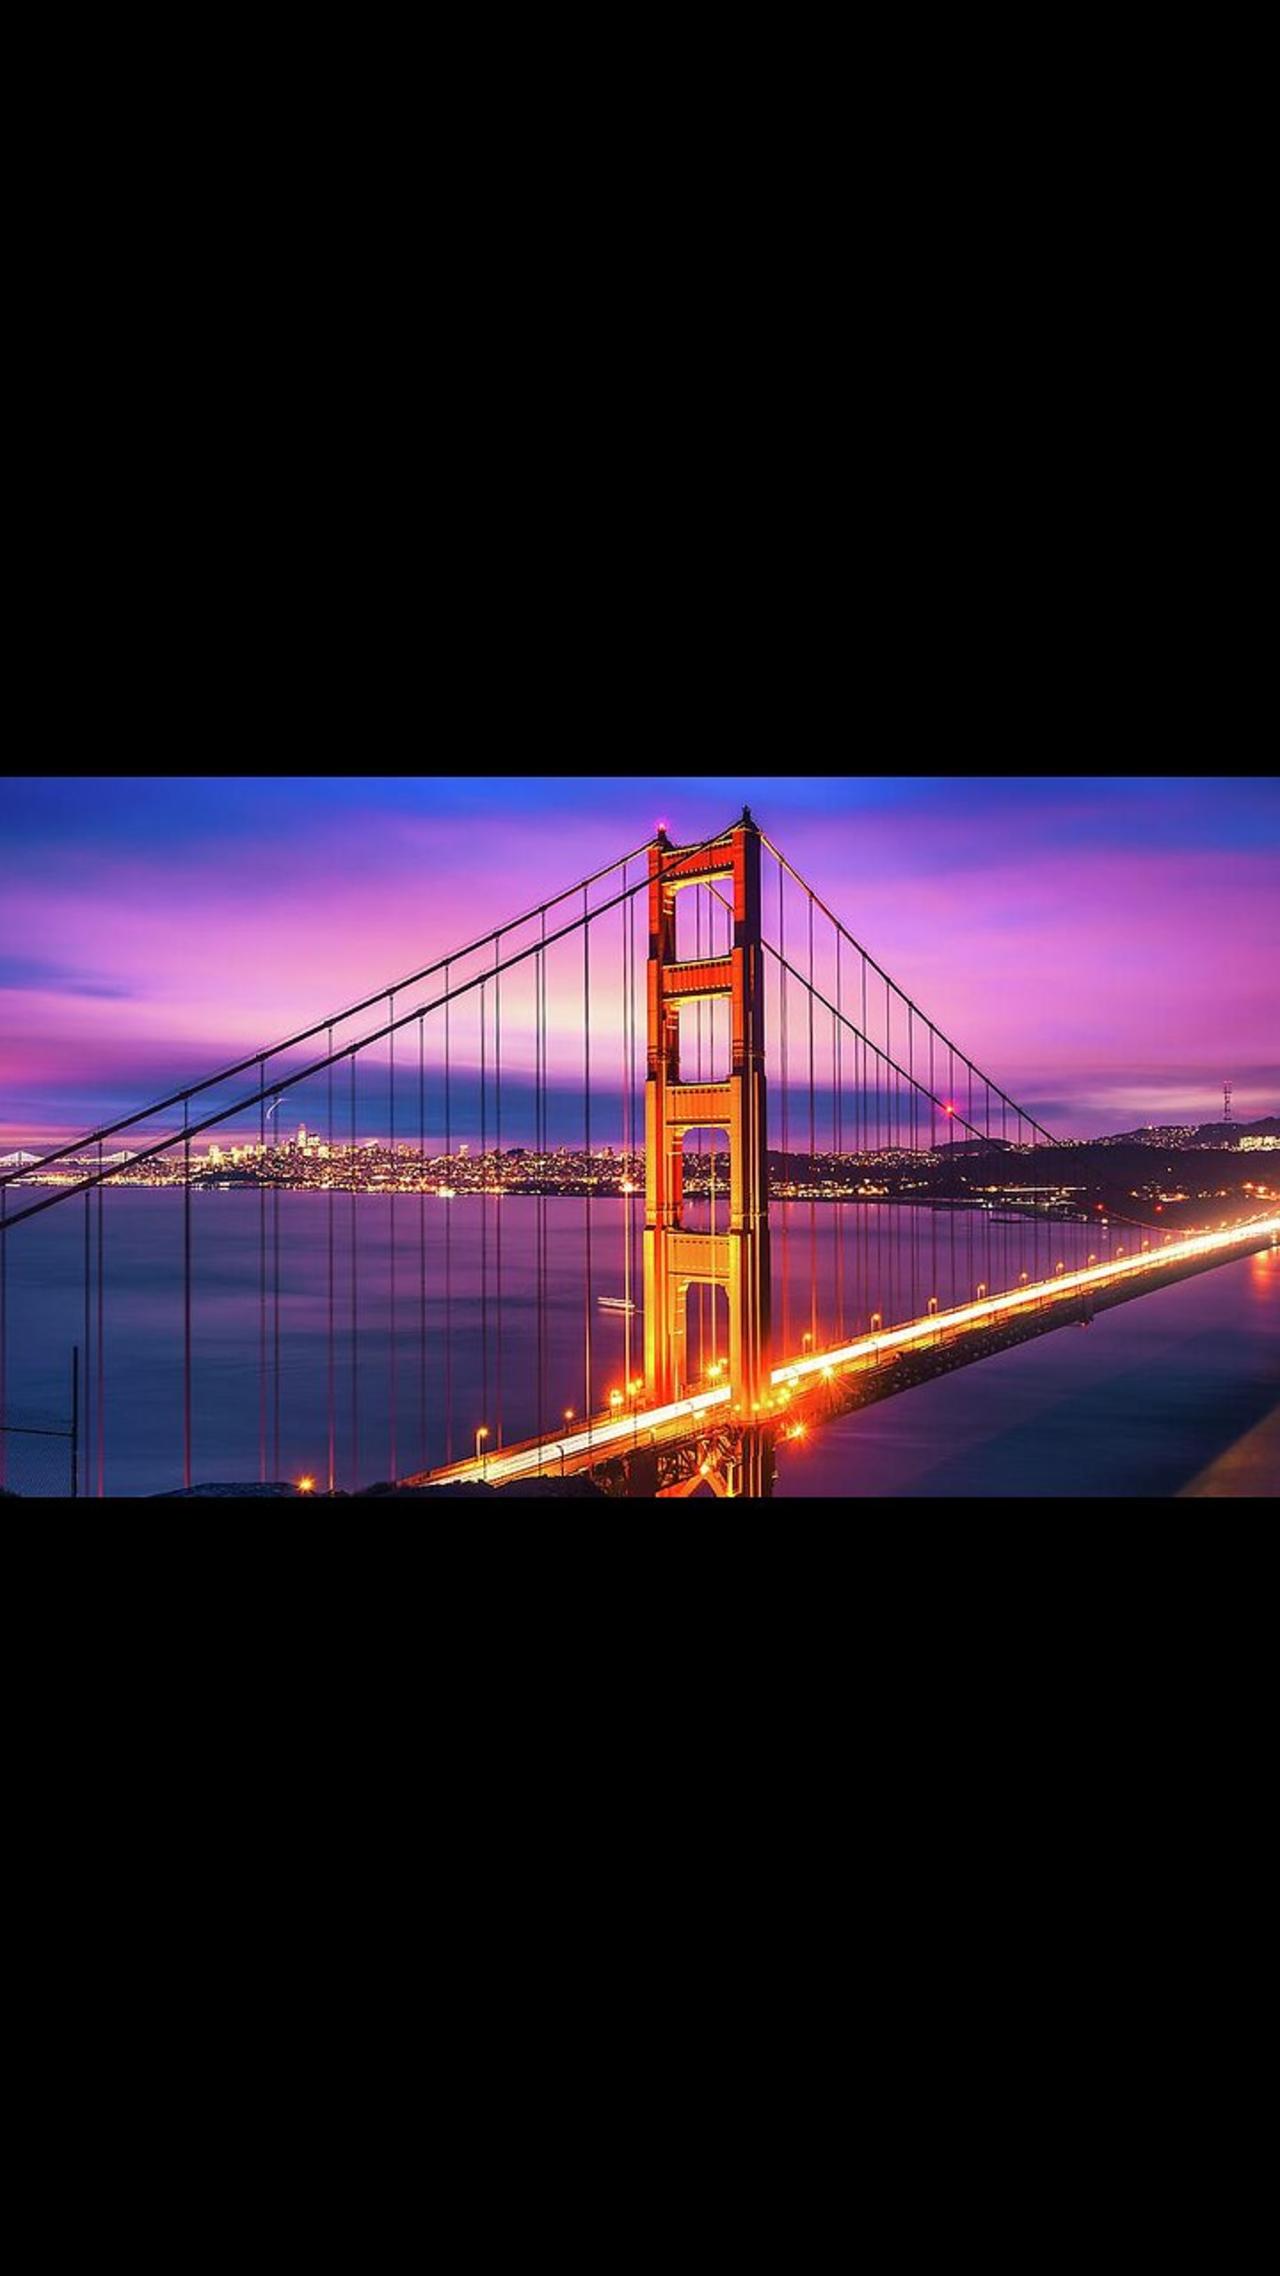 [PROPHECY]: "HIGH-IMPACT DISASTERS & COLLAPSE OF THE GOLDEN GATE BRIDGE"